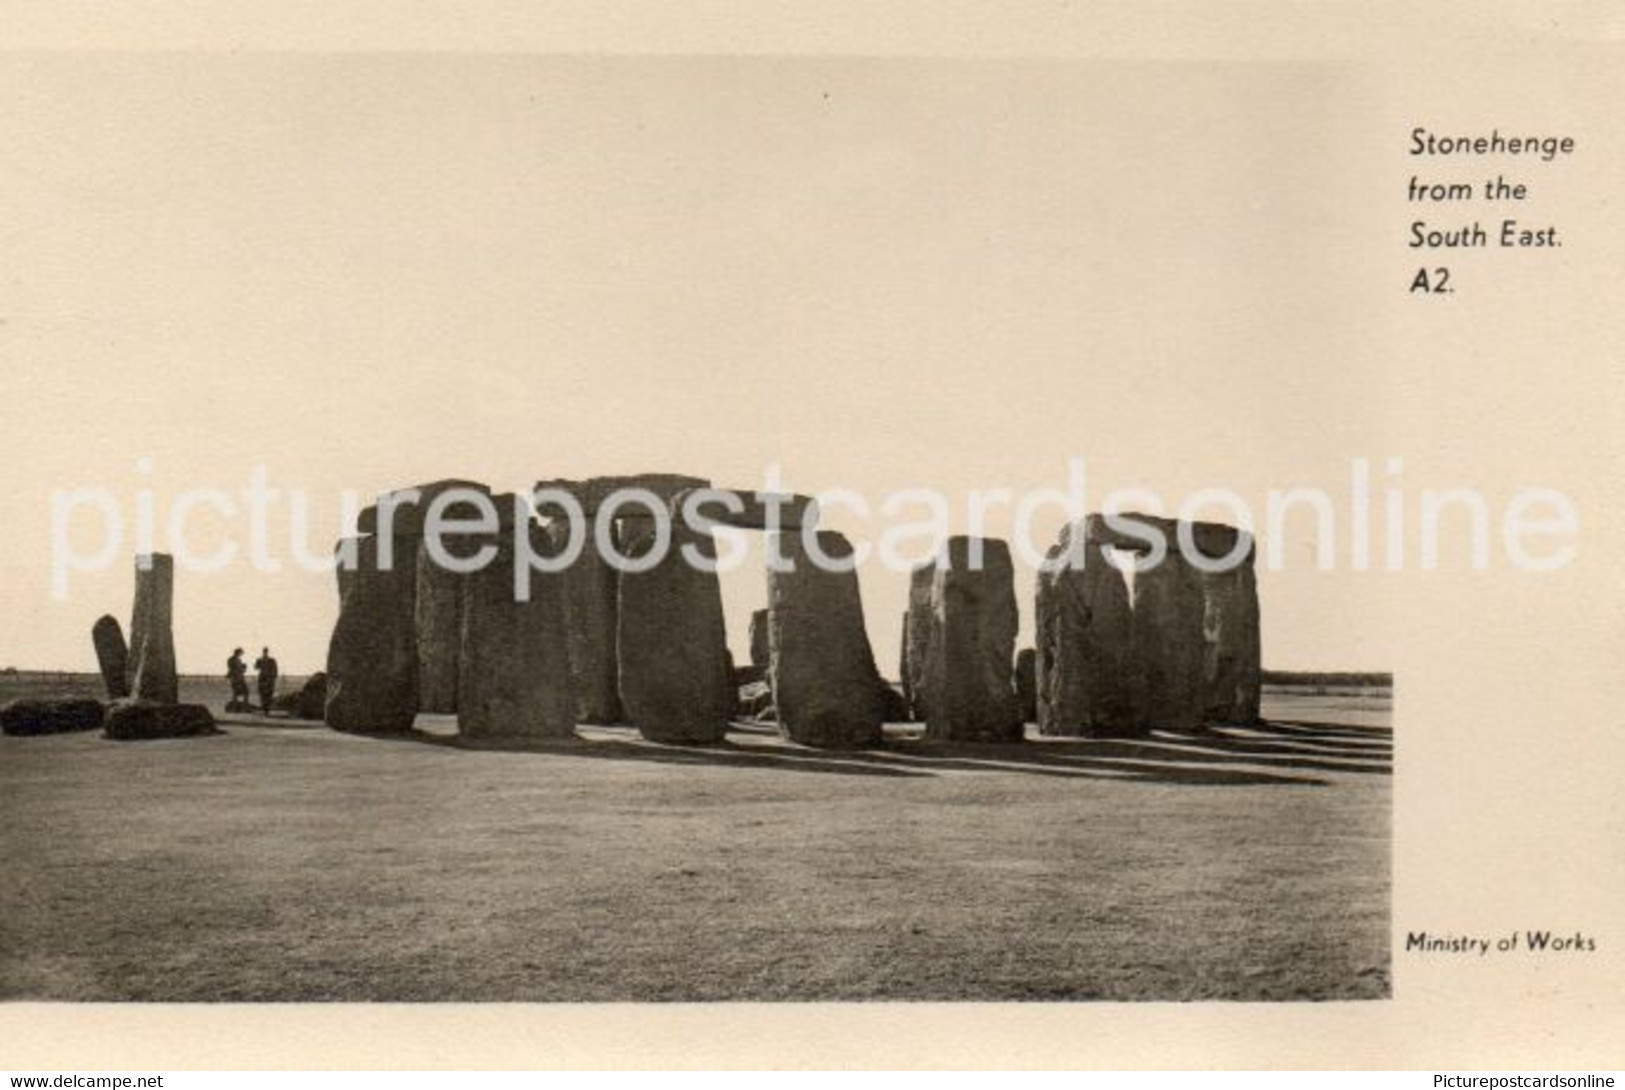 STONEHENGE FROM THE SOUTH EAST A2 OLD R/P POSTCARD MINISTRY OF WORKS - Stonehenge